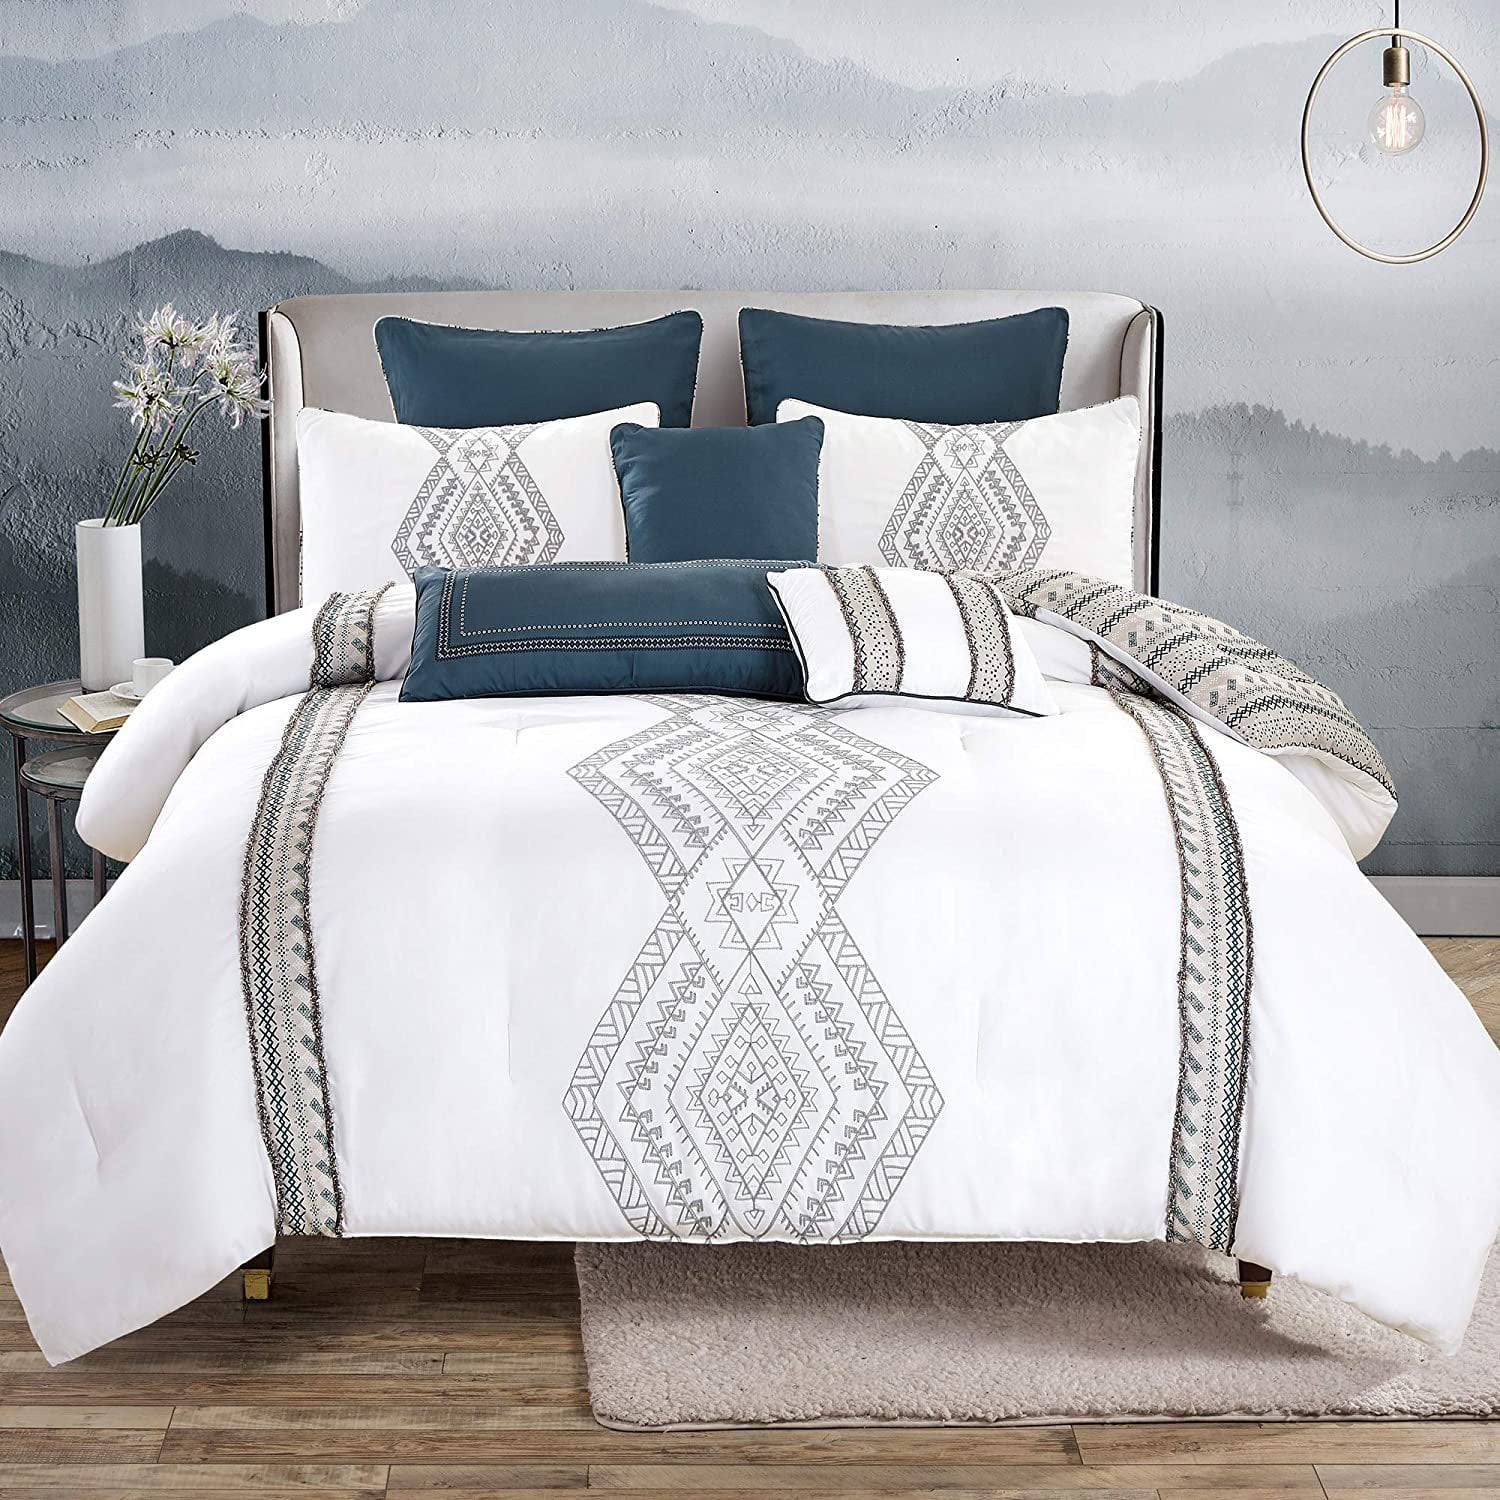 Sapphire Home Luxury 8 Piece King, King Duvet Cover And Shams